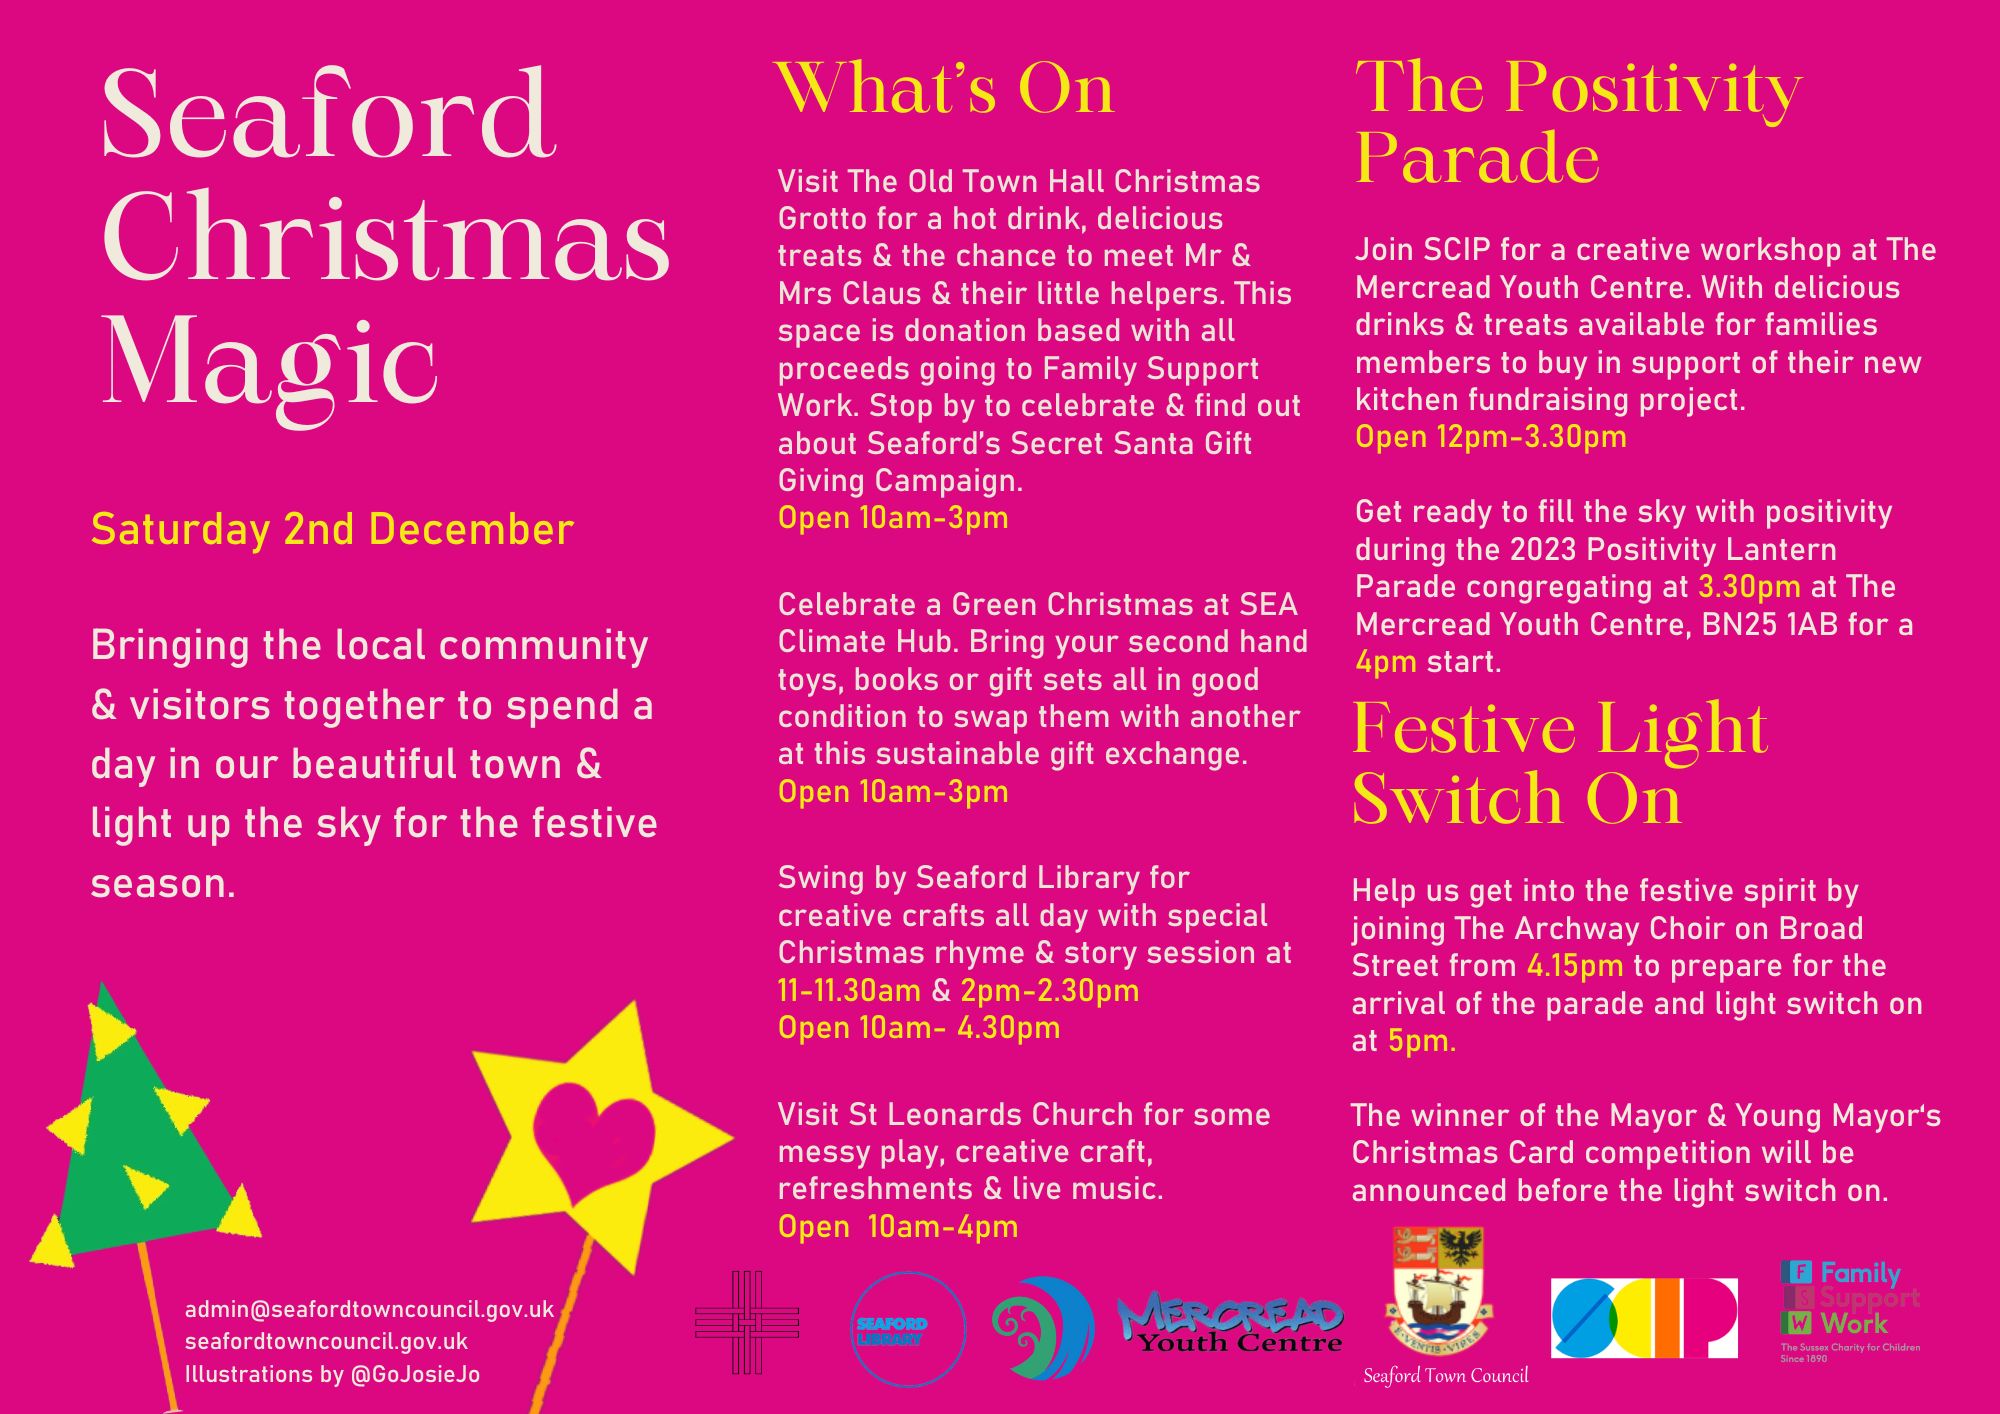 Poster with the following information: Seaford Christmas Magic on Saturday 2nd December.